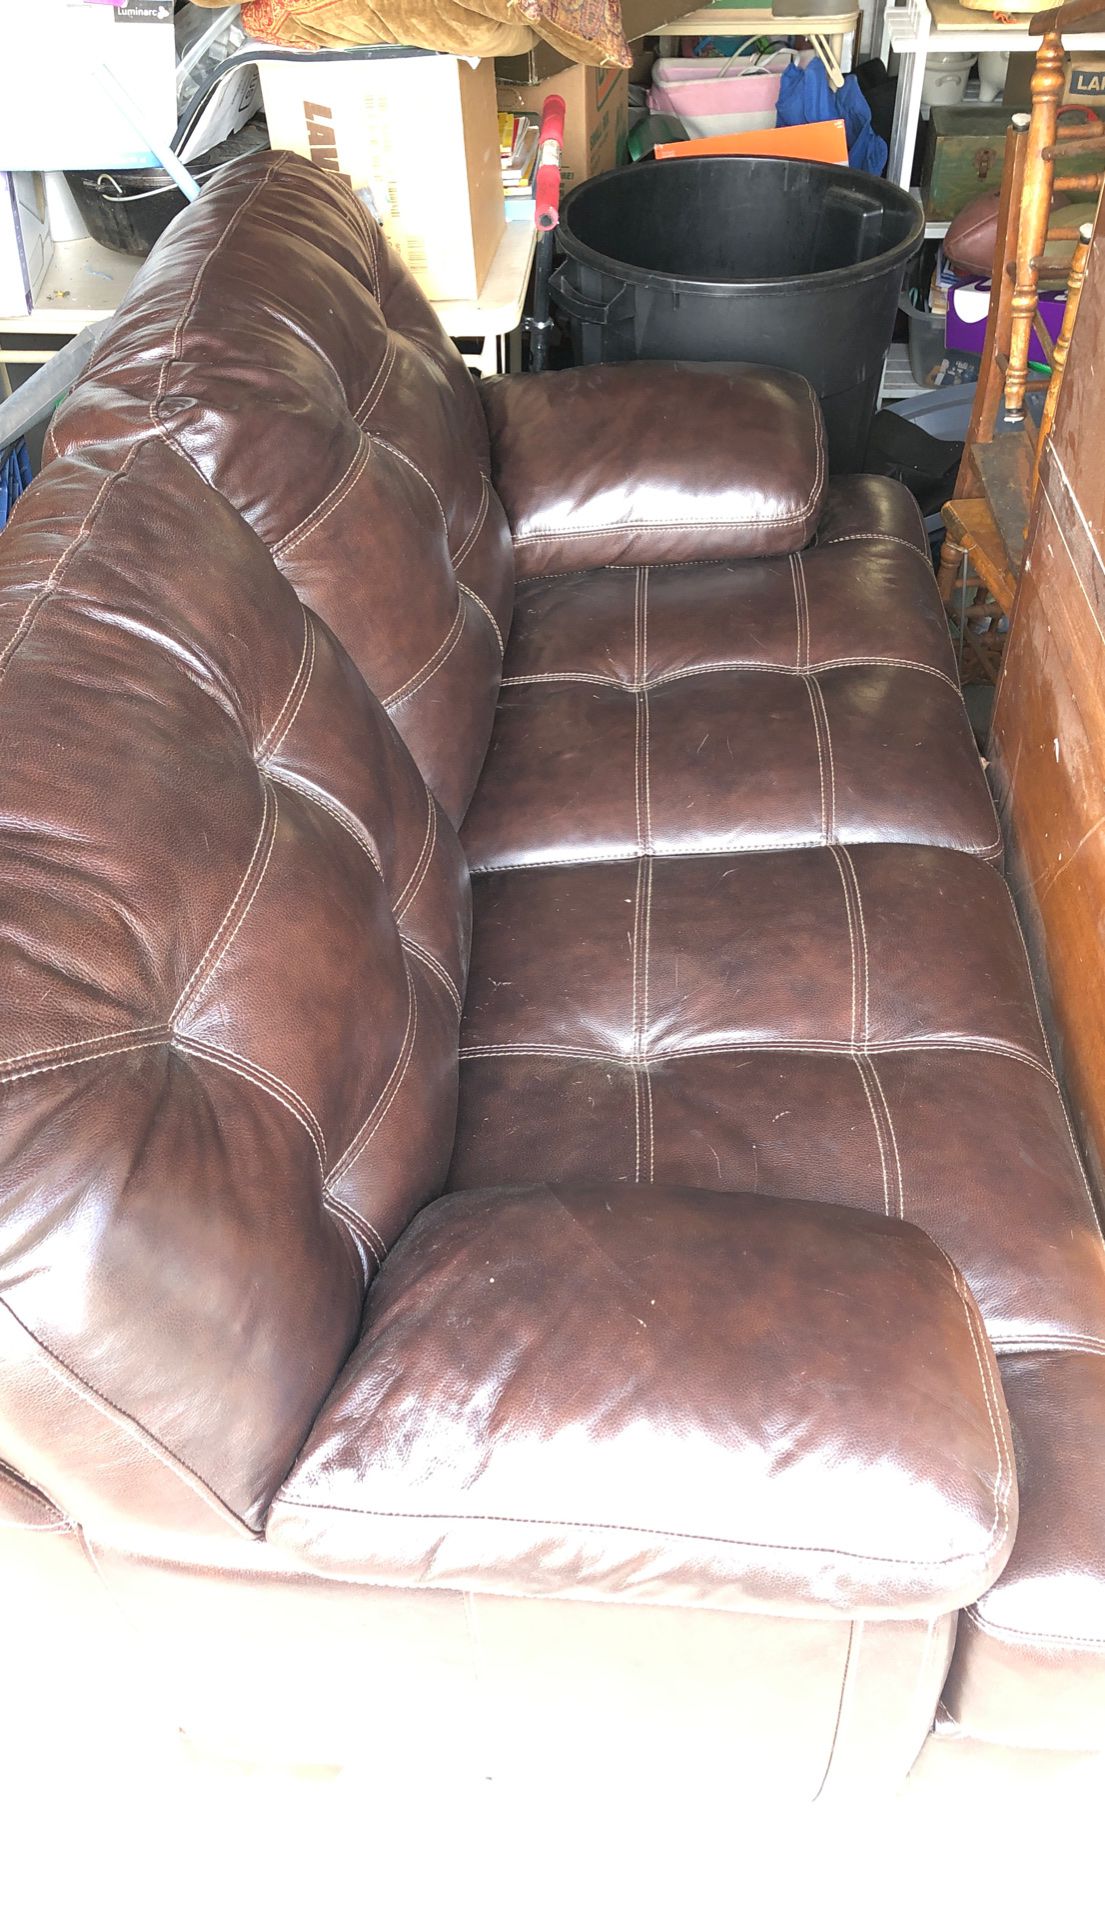 Brown leather loveseat